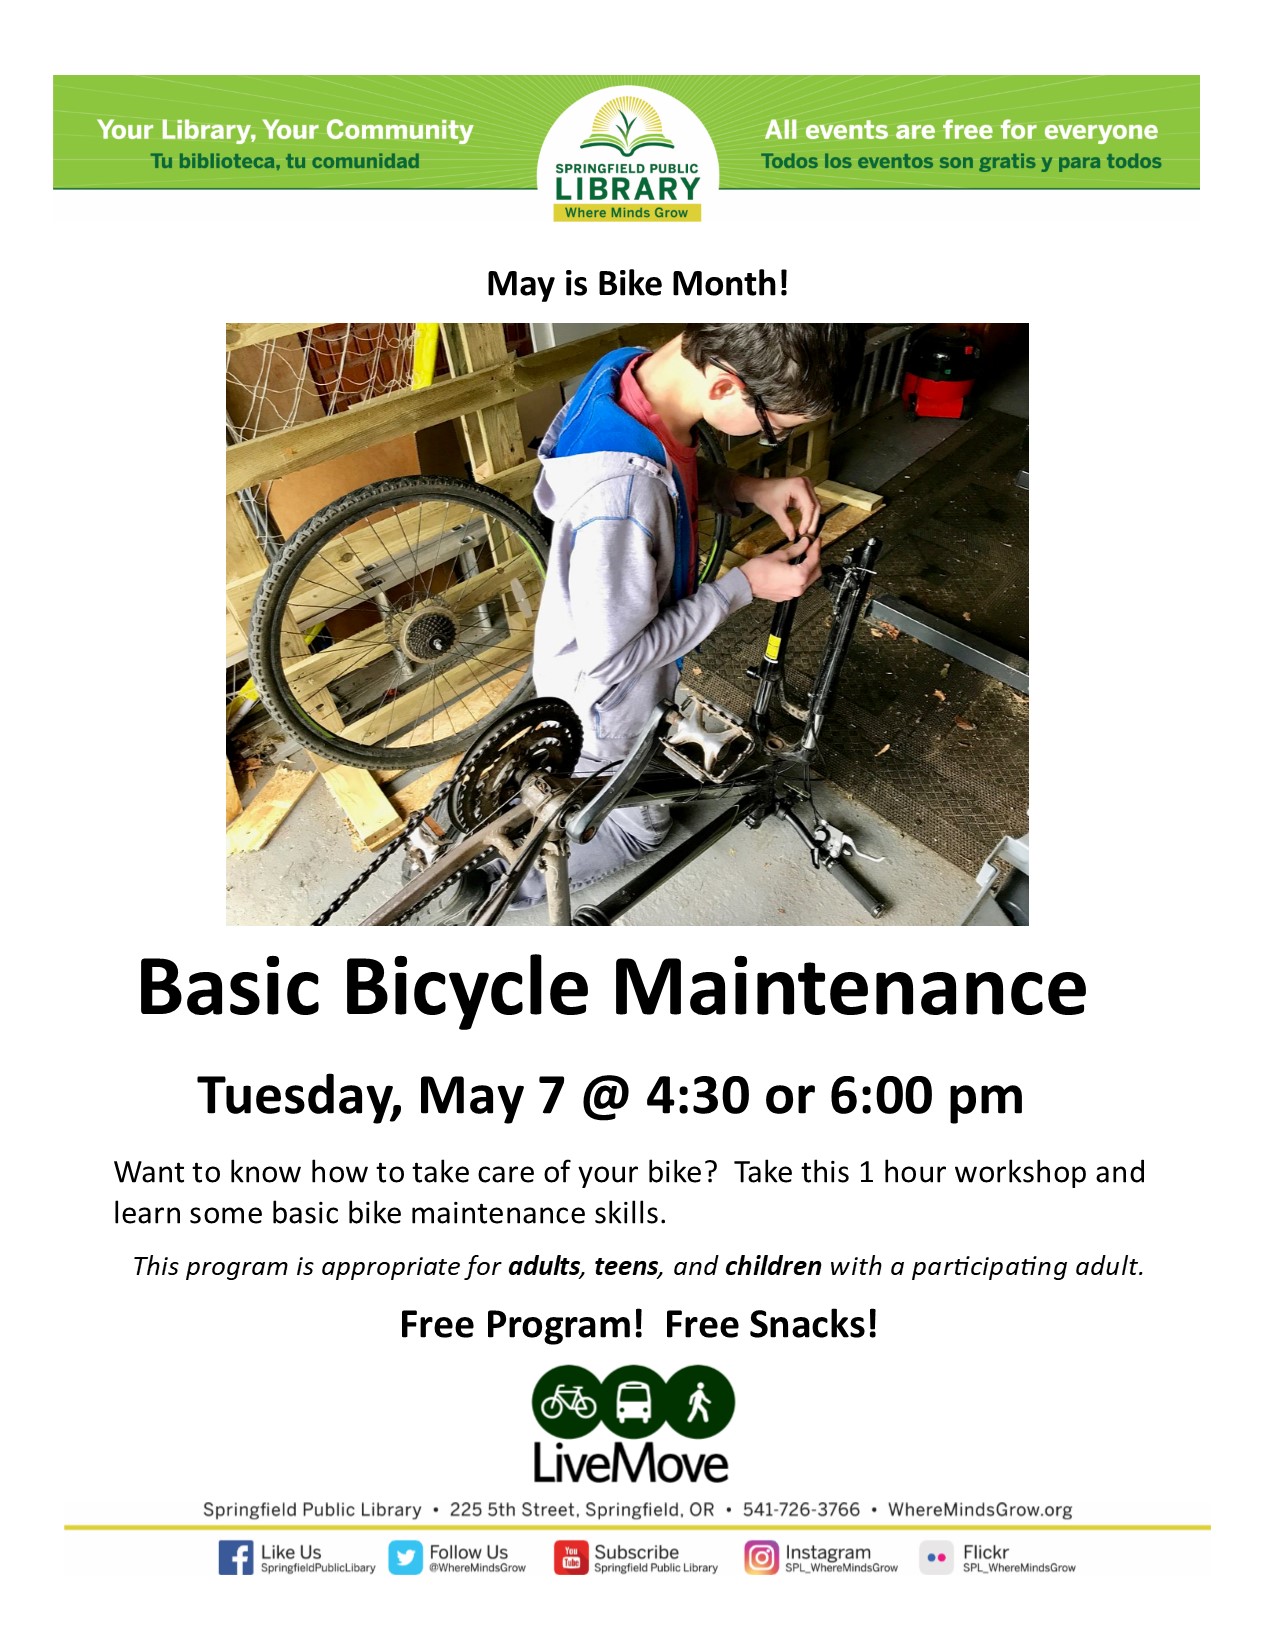 Basic Bicycle Maintenance Event Poster